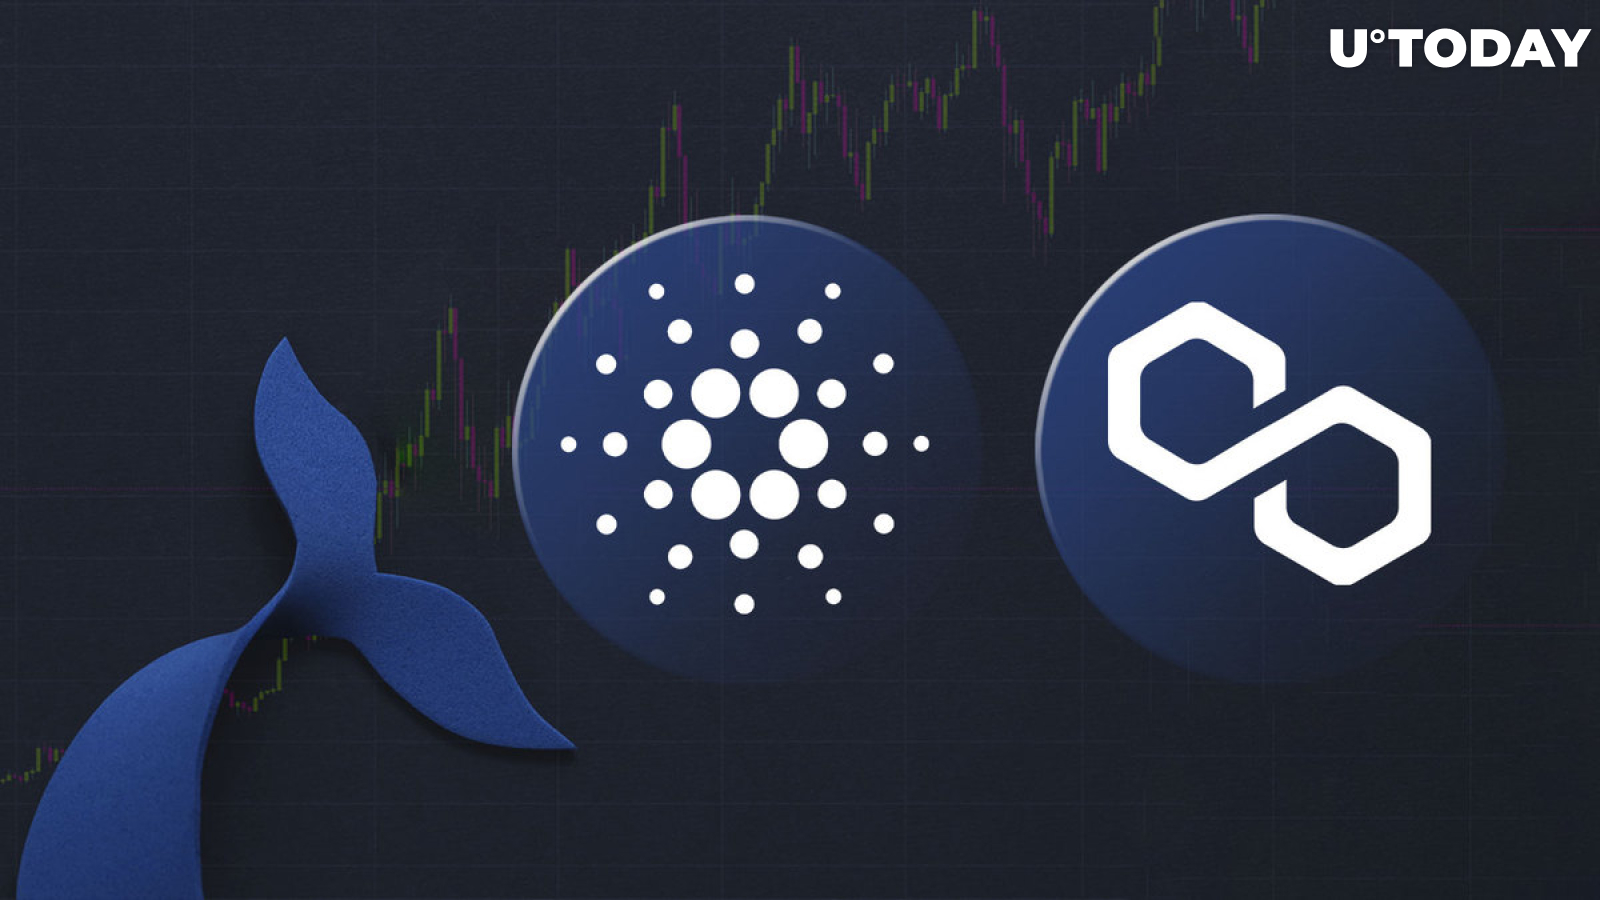 Cardano (ADA) and Polygon (MATIC): Why Are Whales So Interested in These Cryptocurrencies?